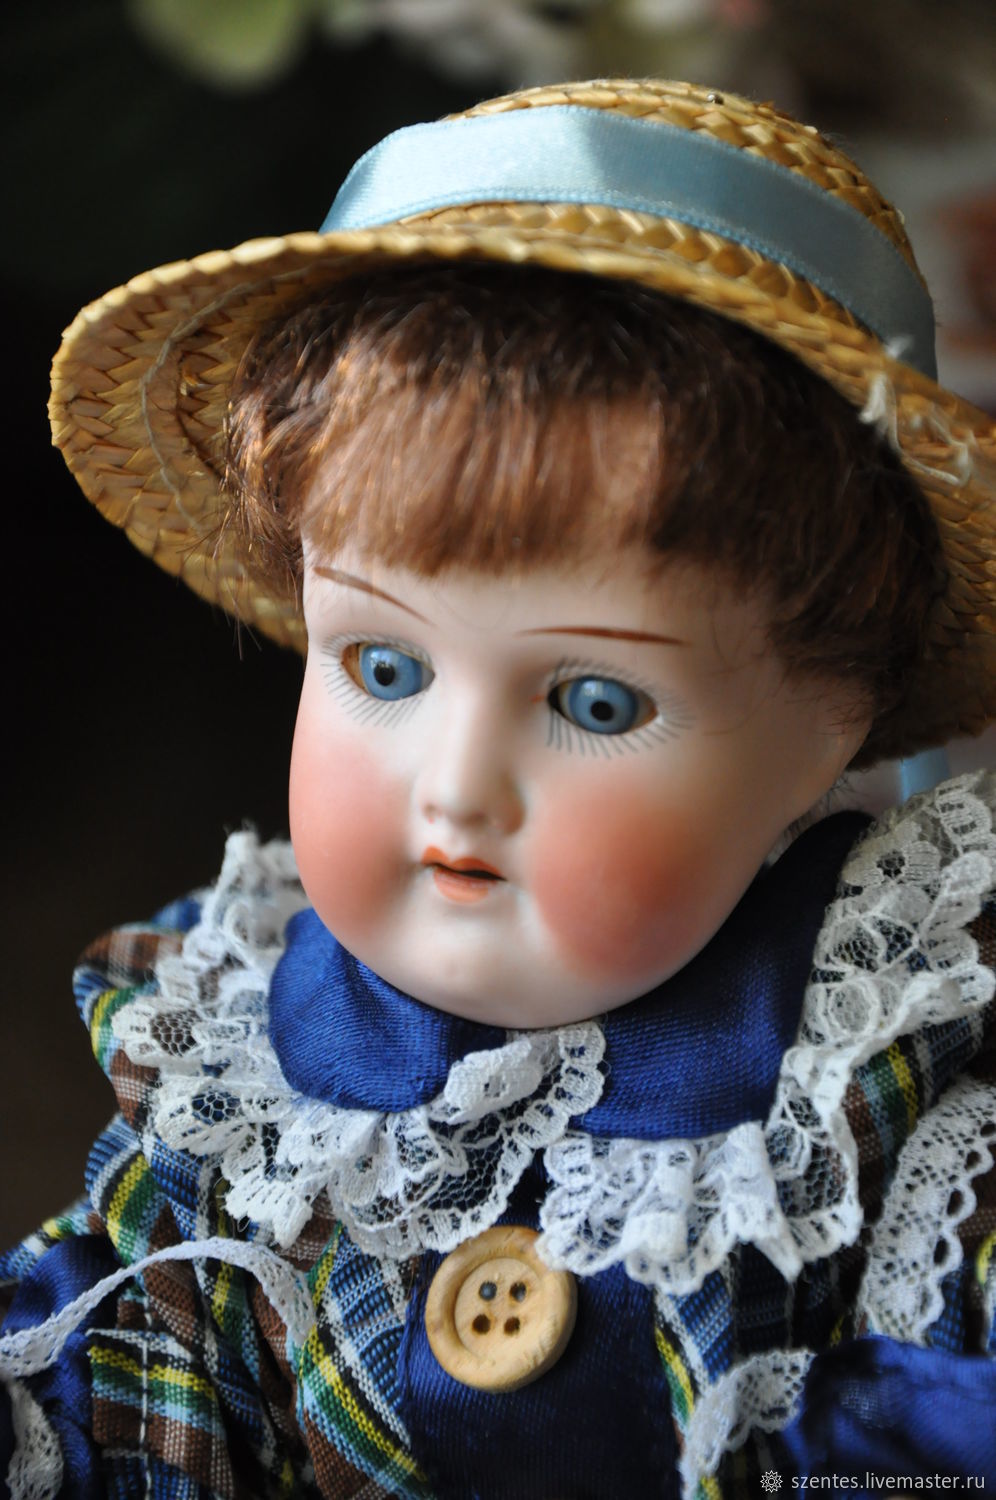  Antique baby, Vintage doll, Budapest,  Фото №1